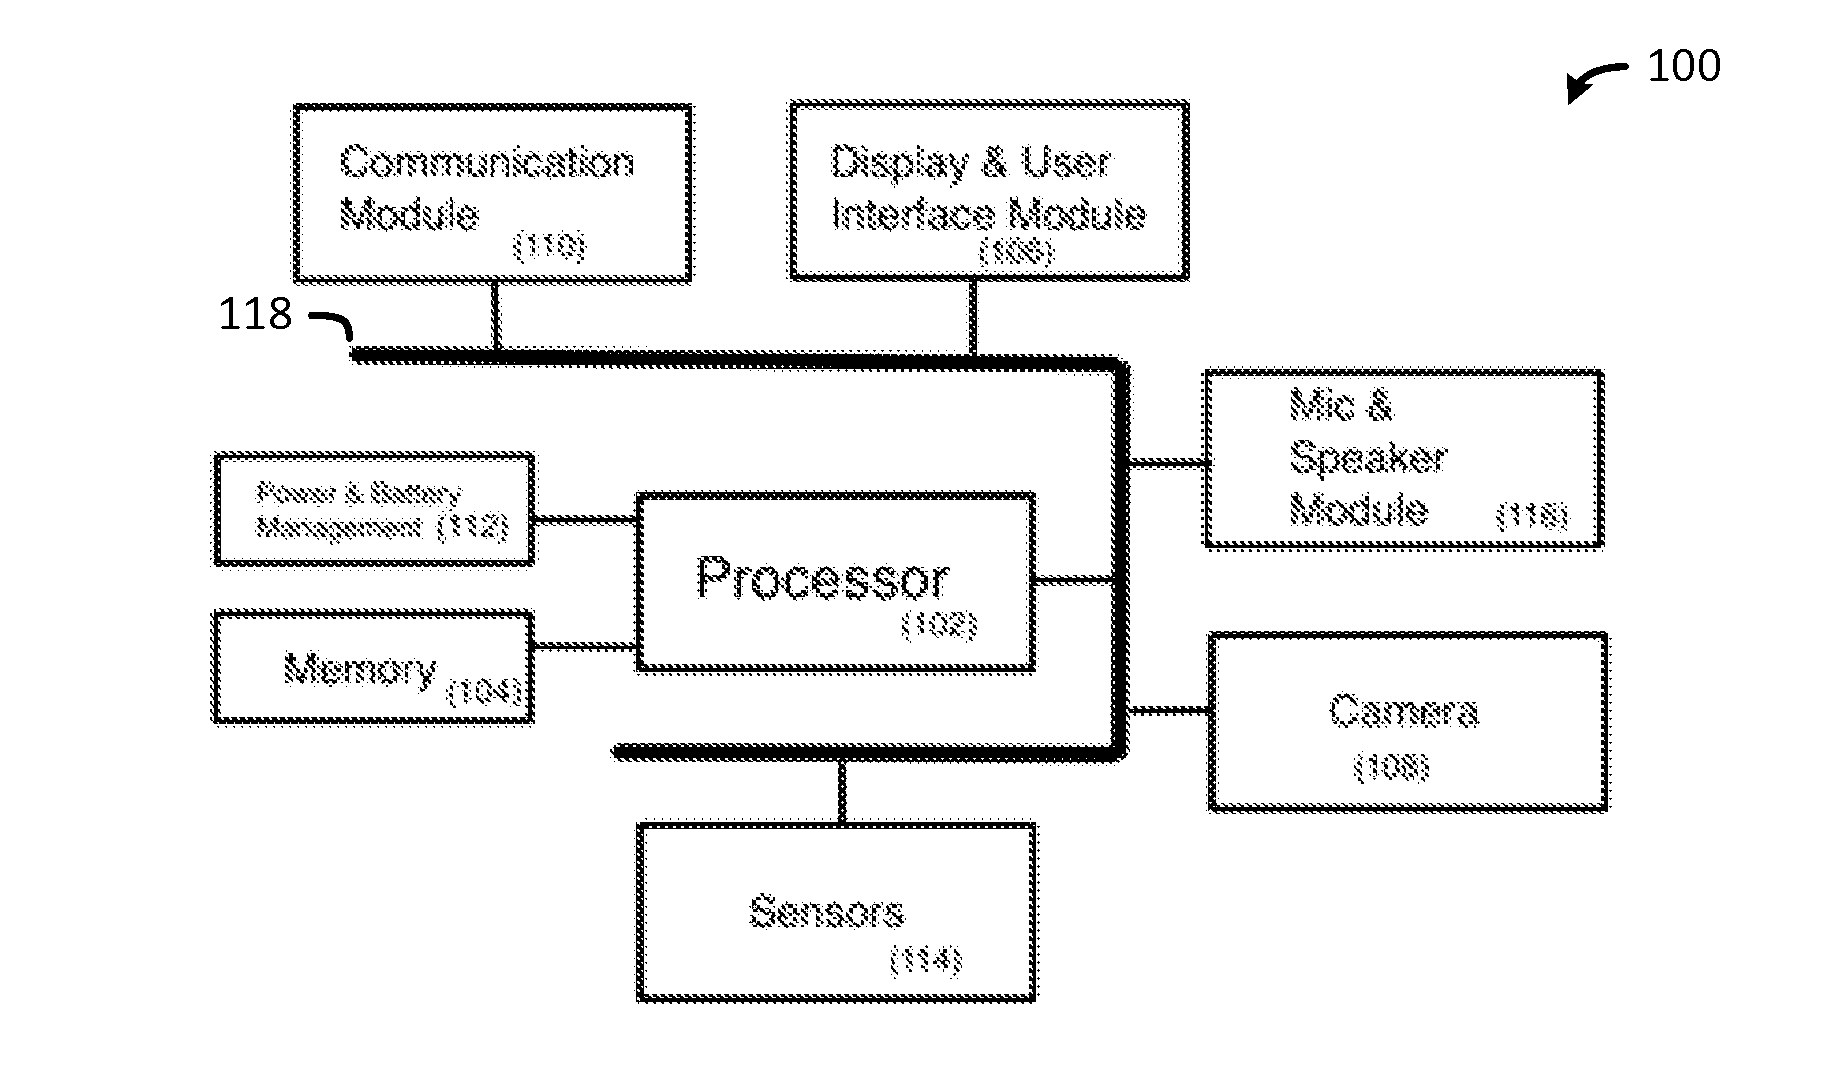 Method and Apparatus for Monitoring Diet and Activity